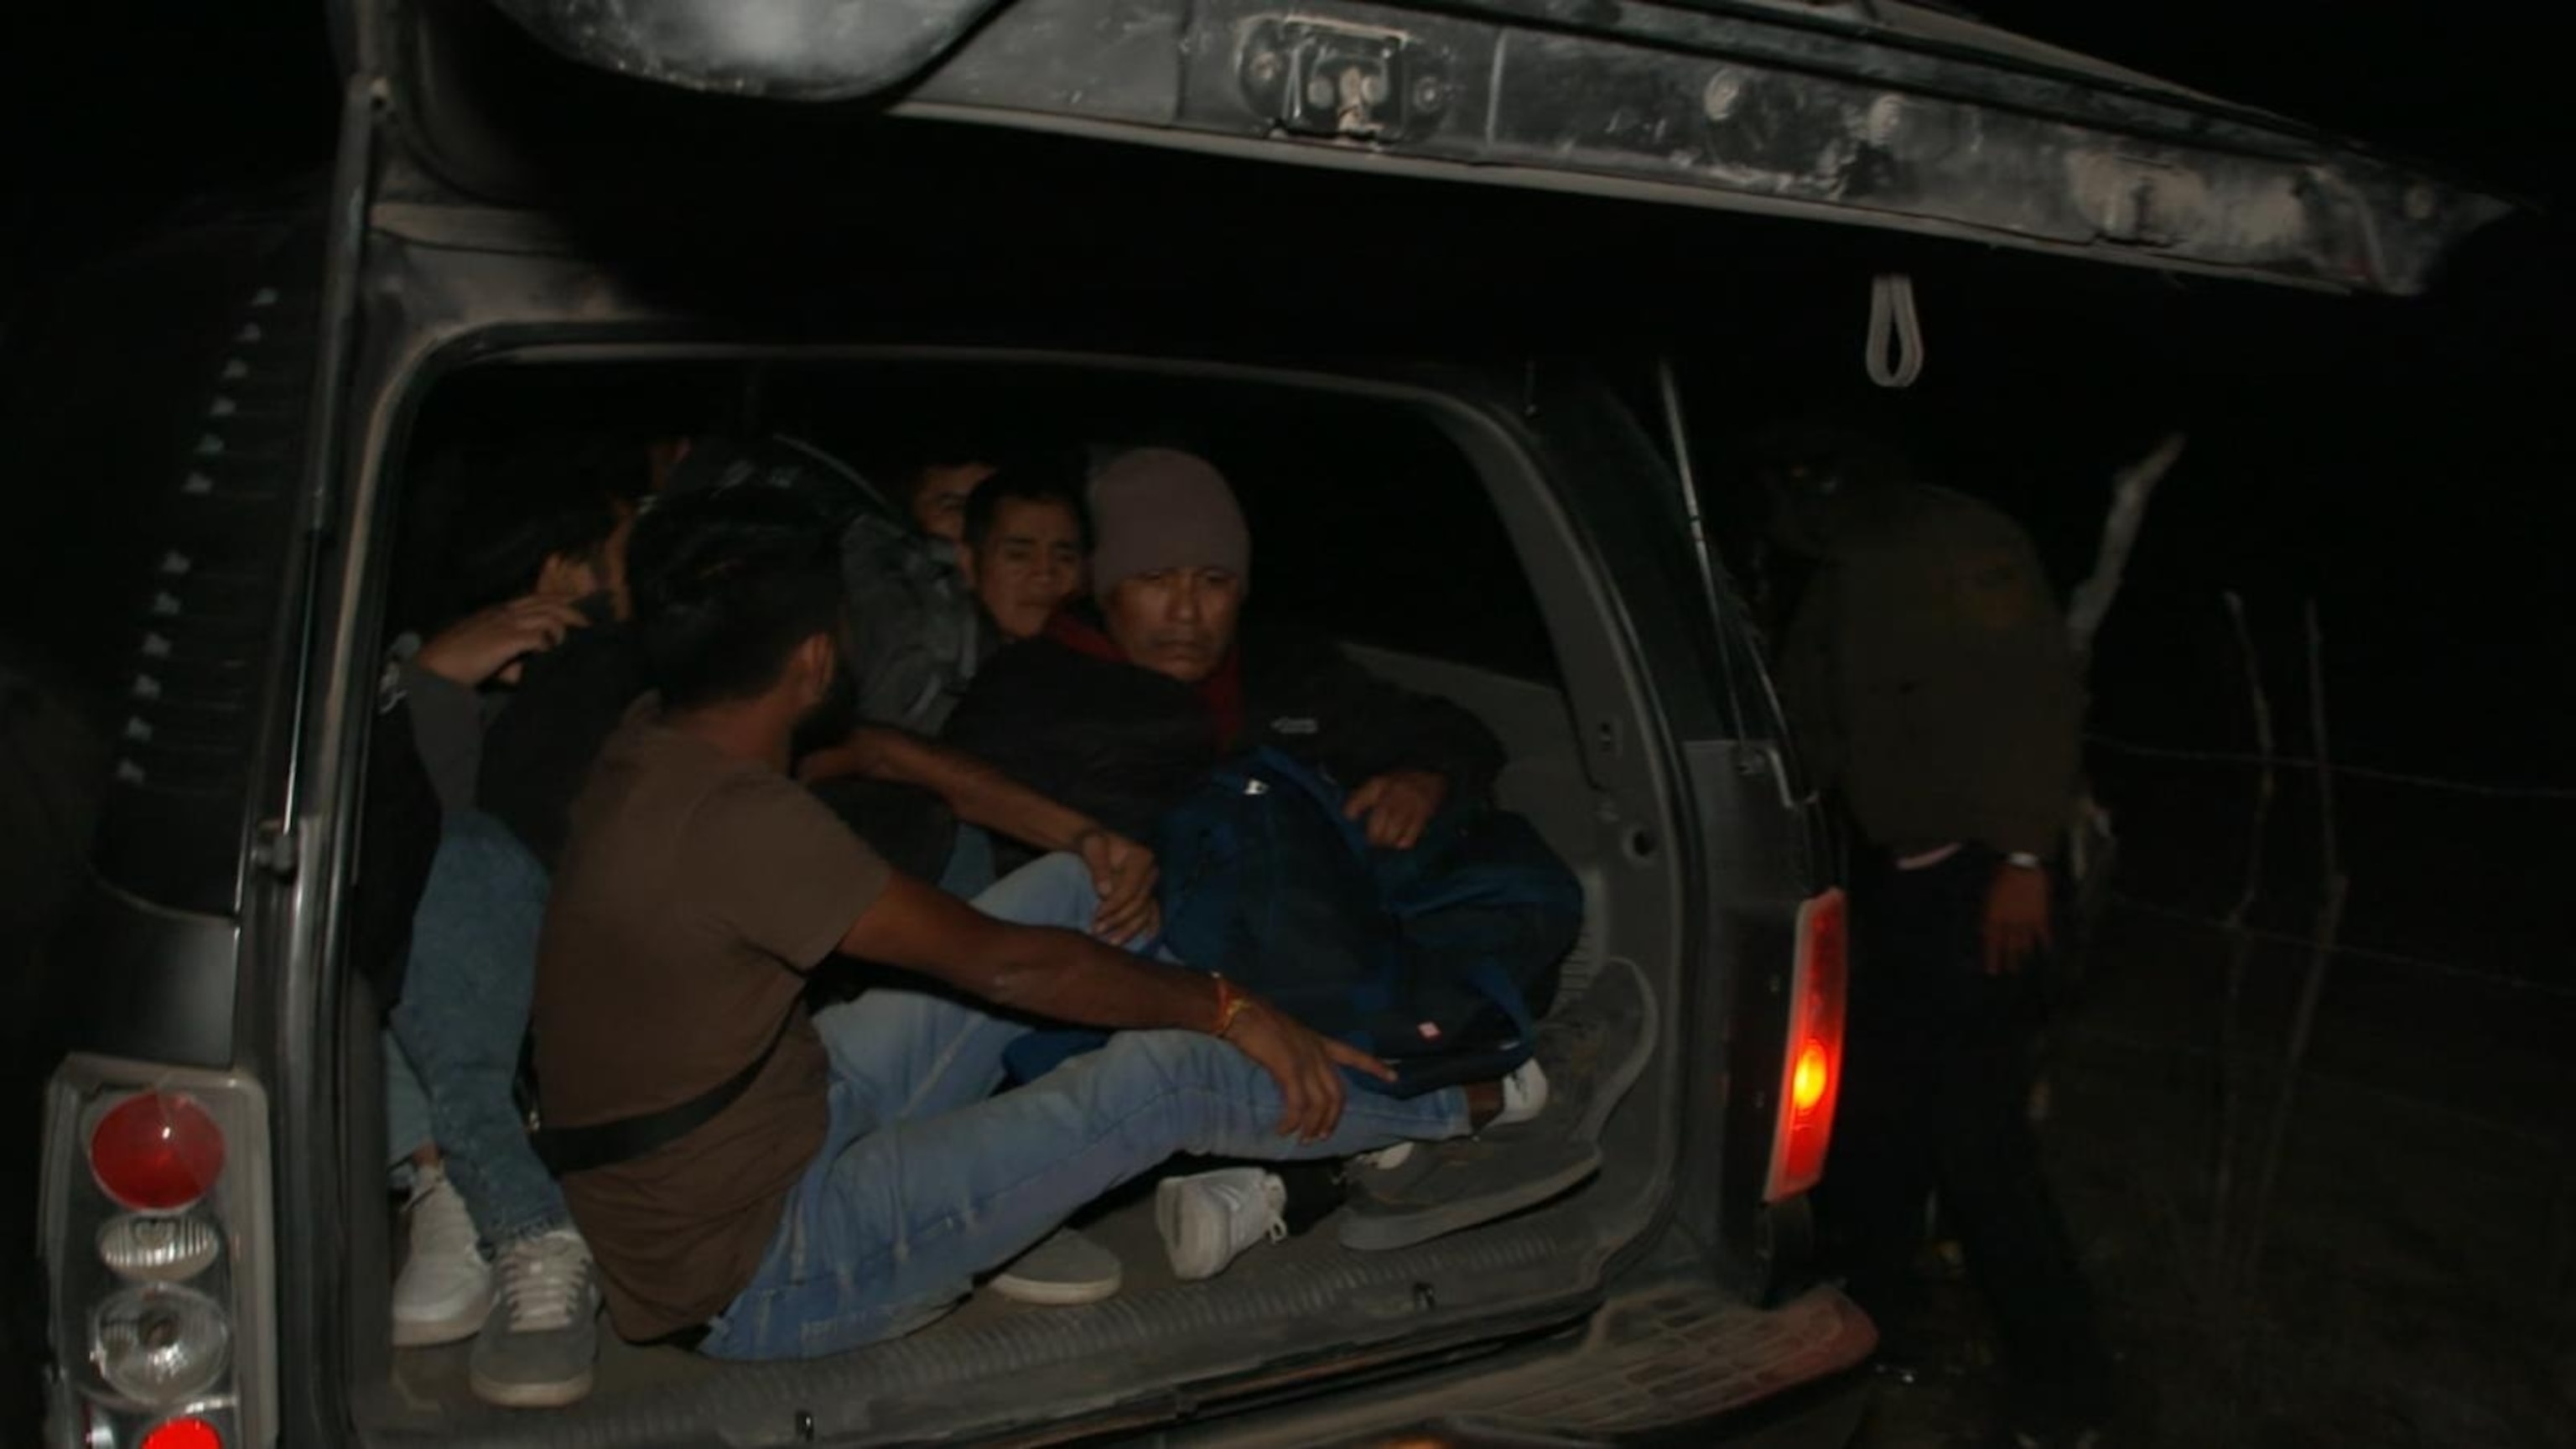 PHOTO: ABC News' Matt Rivers reports on the lucrative human smuggling business at the U.S.-Mexico border and gets exclusive access to a cartel's operation.